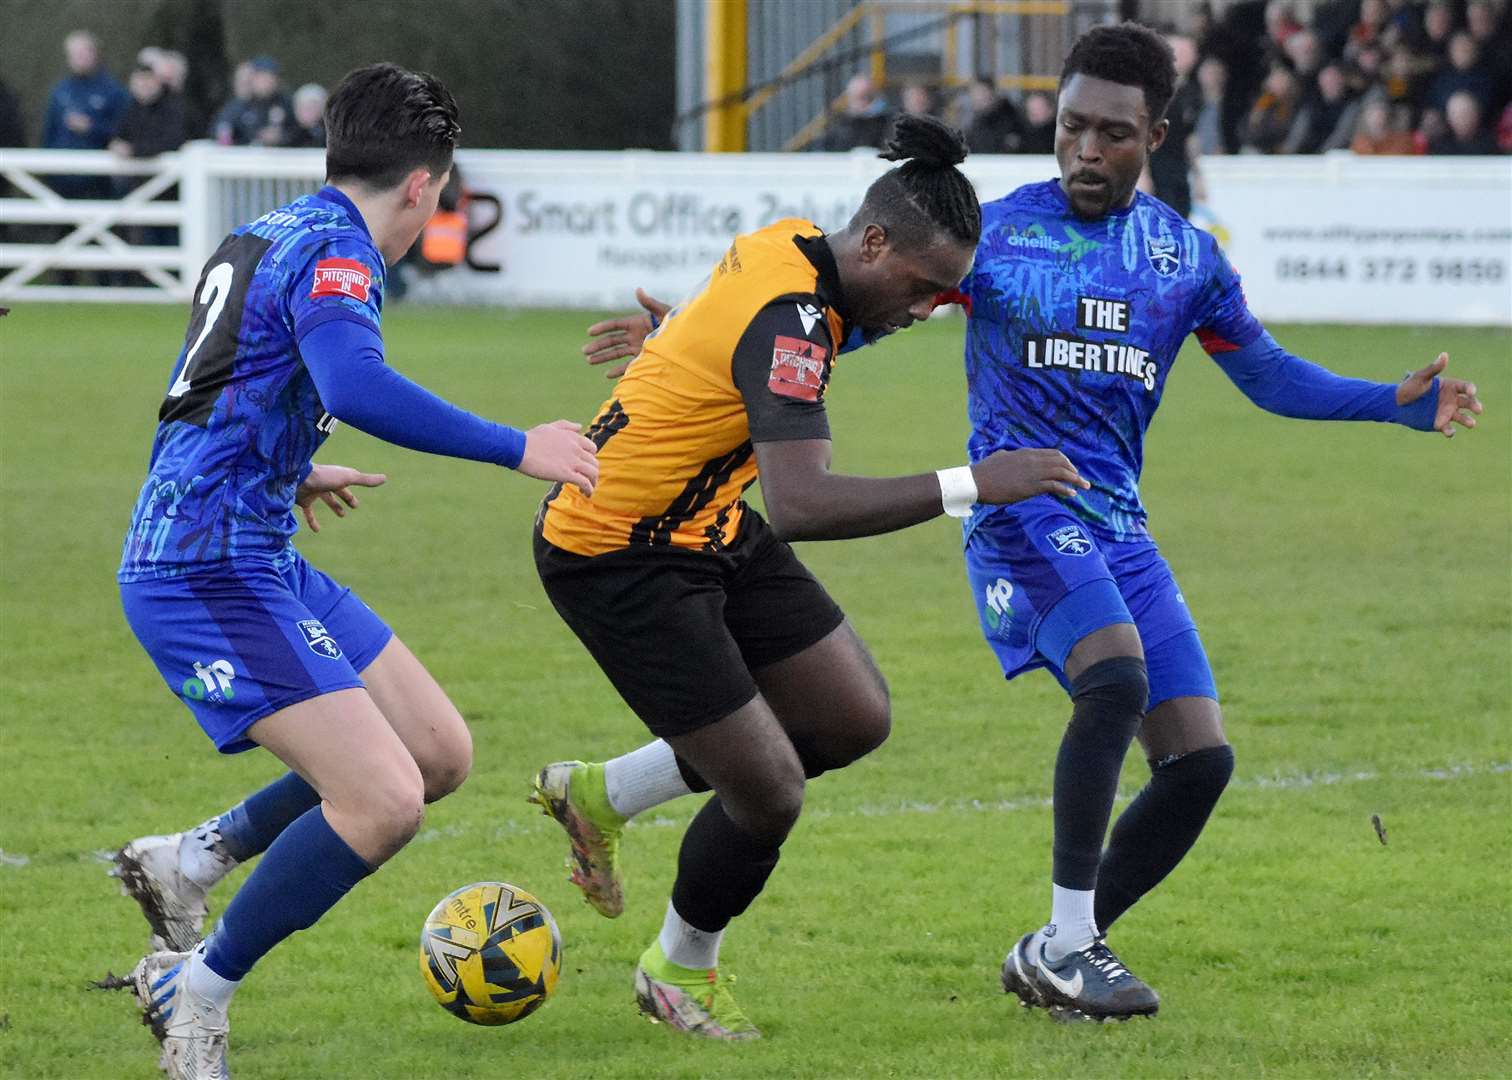 Folkestone's Ira Jackson is closed down by Margate defender Harrison Hatfull, left, and another away player in their 4-0 loss at Cheriton Road. Picture: Randolph File